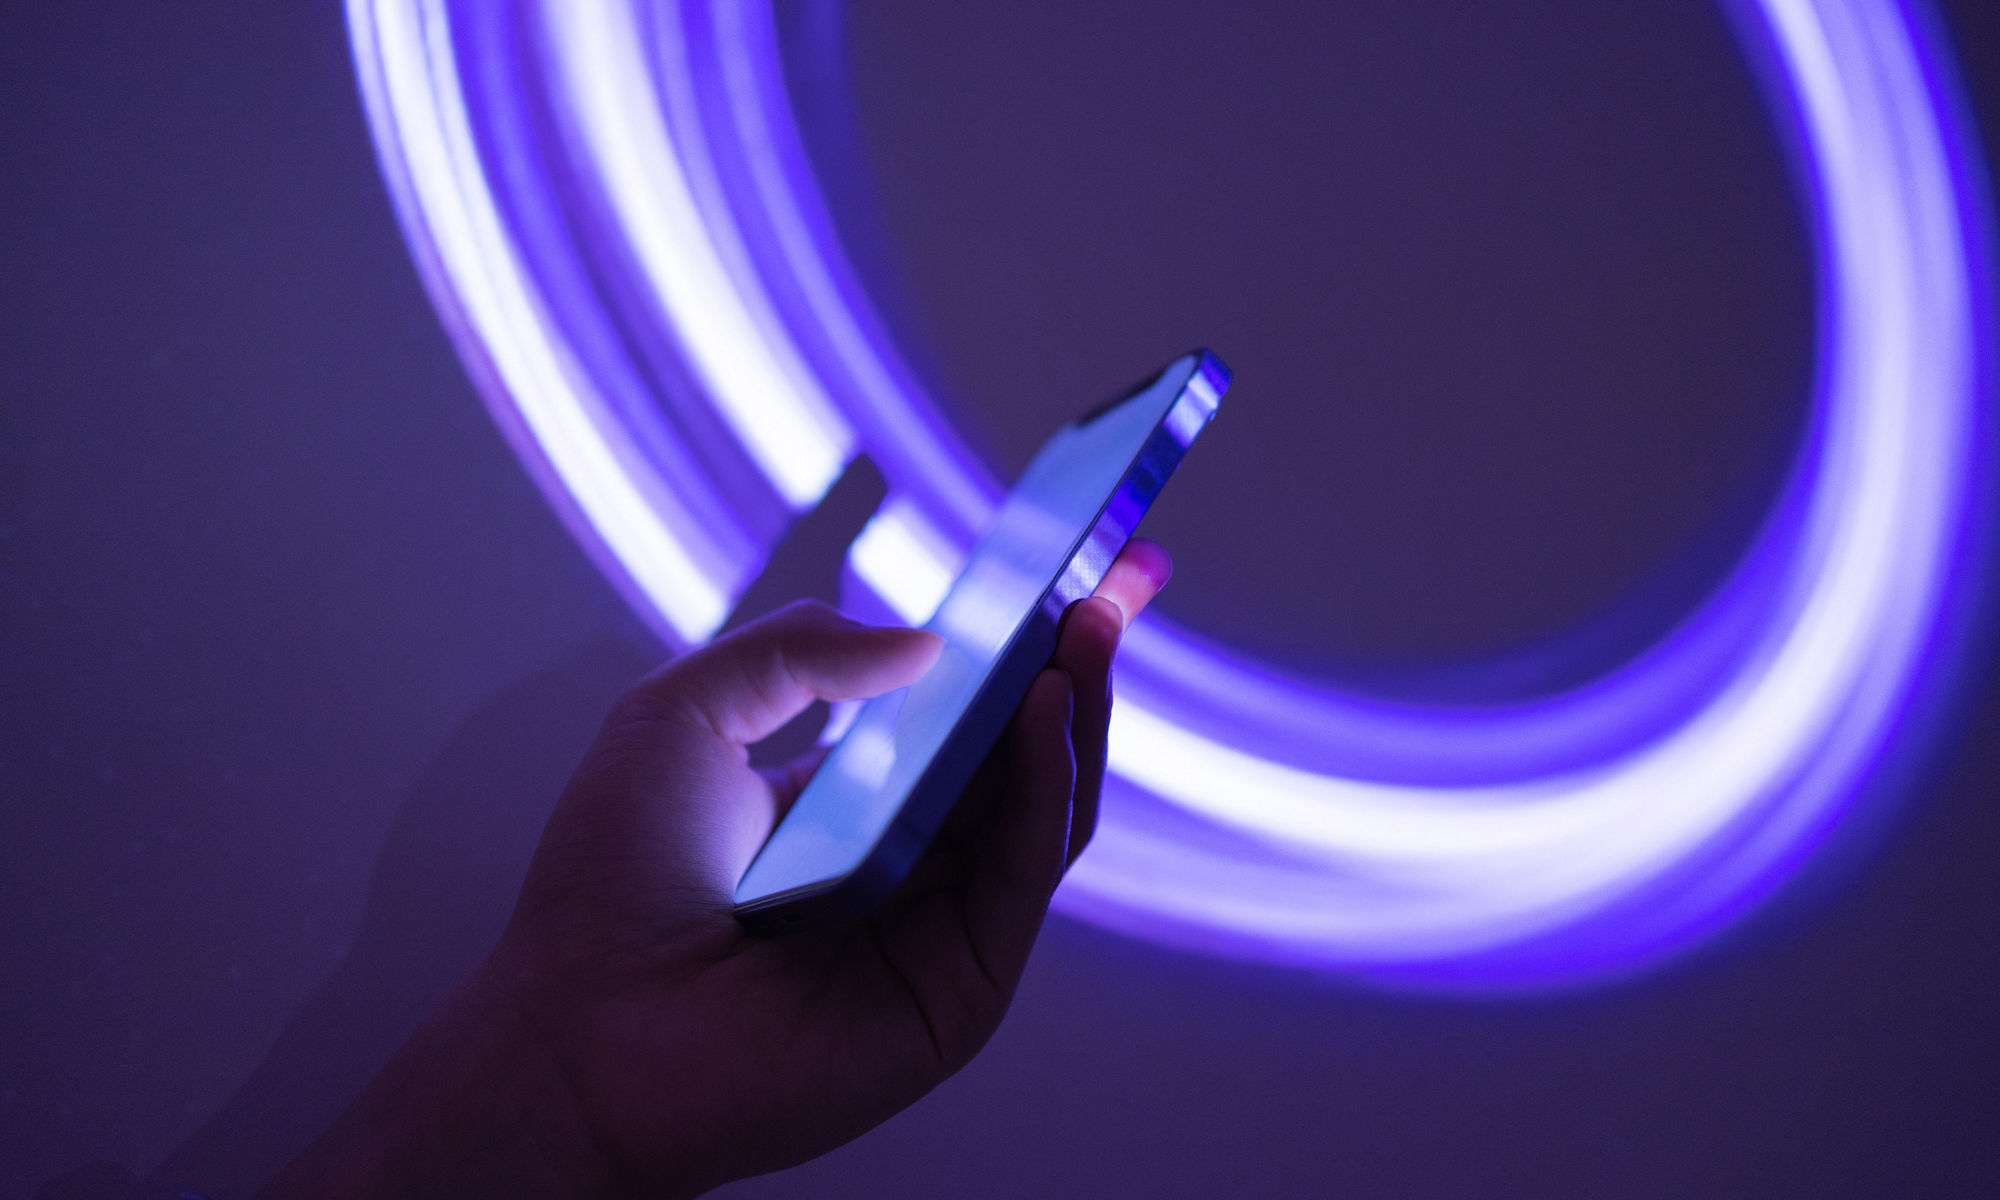 Phone being used with neon blue circular lines as background